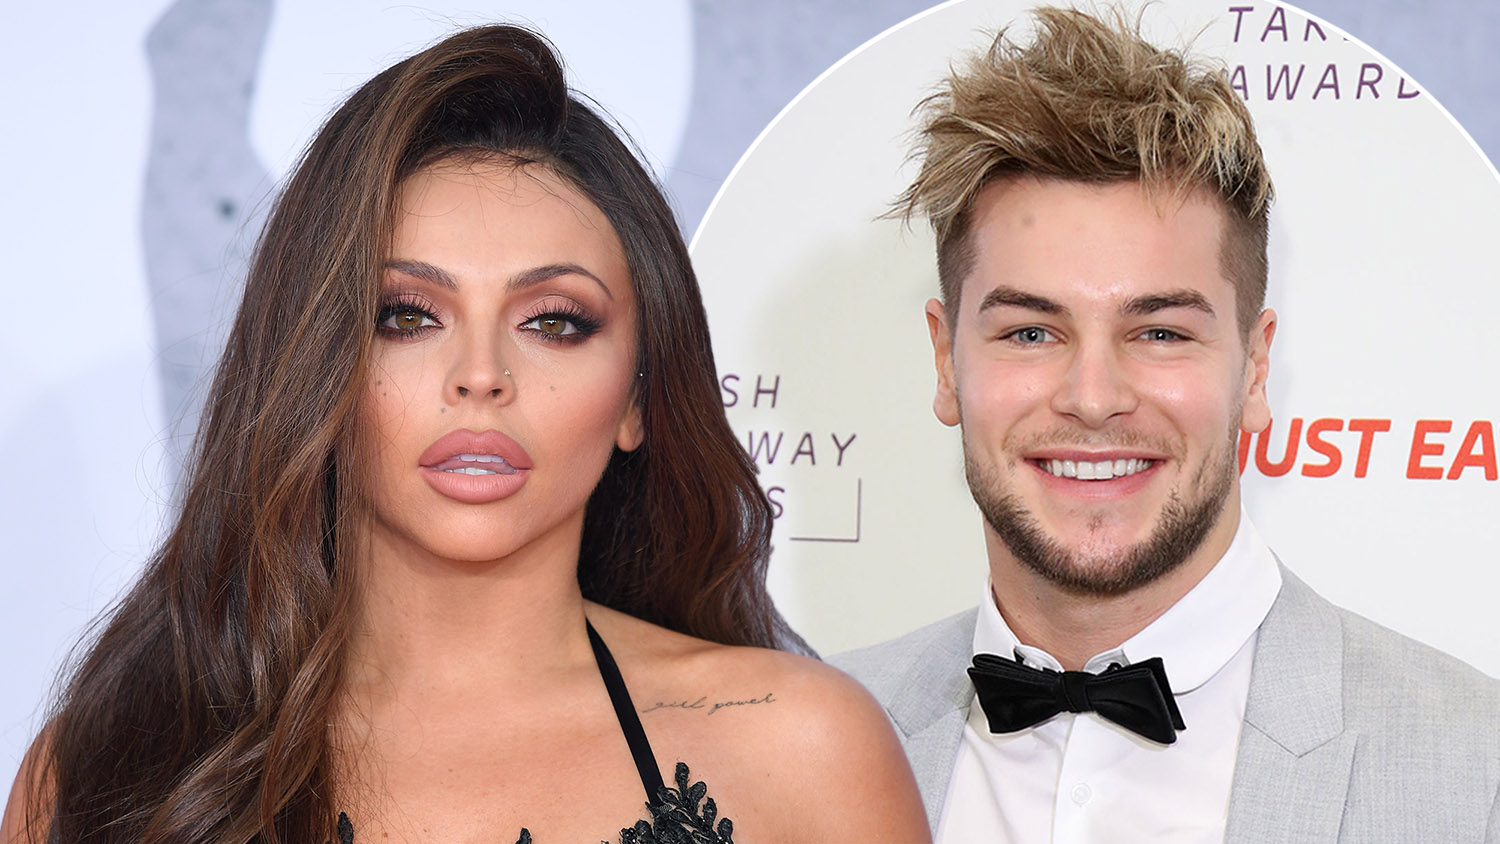 Little Mix's Jesy Nelson posts loved-up snaps new Chris Hughes